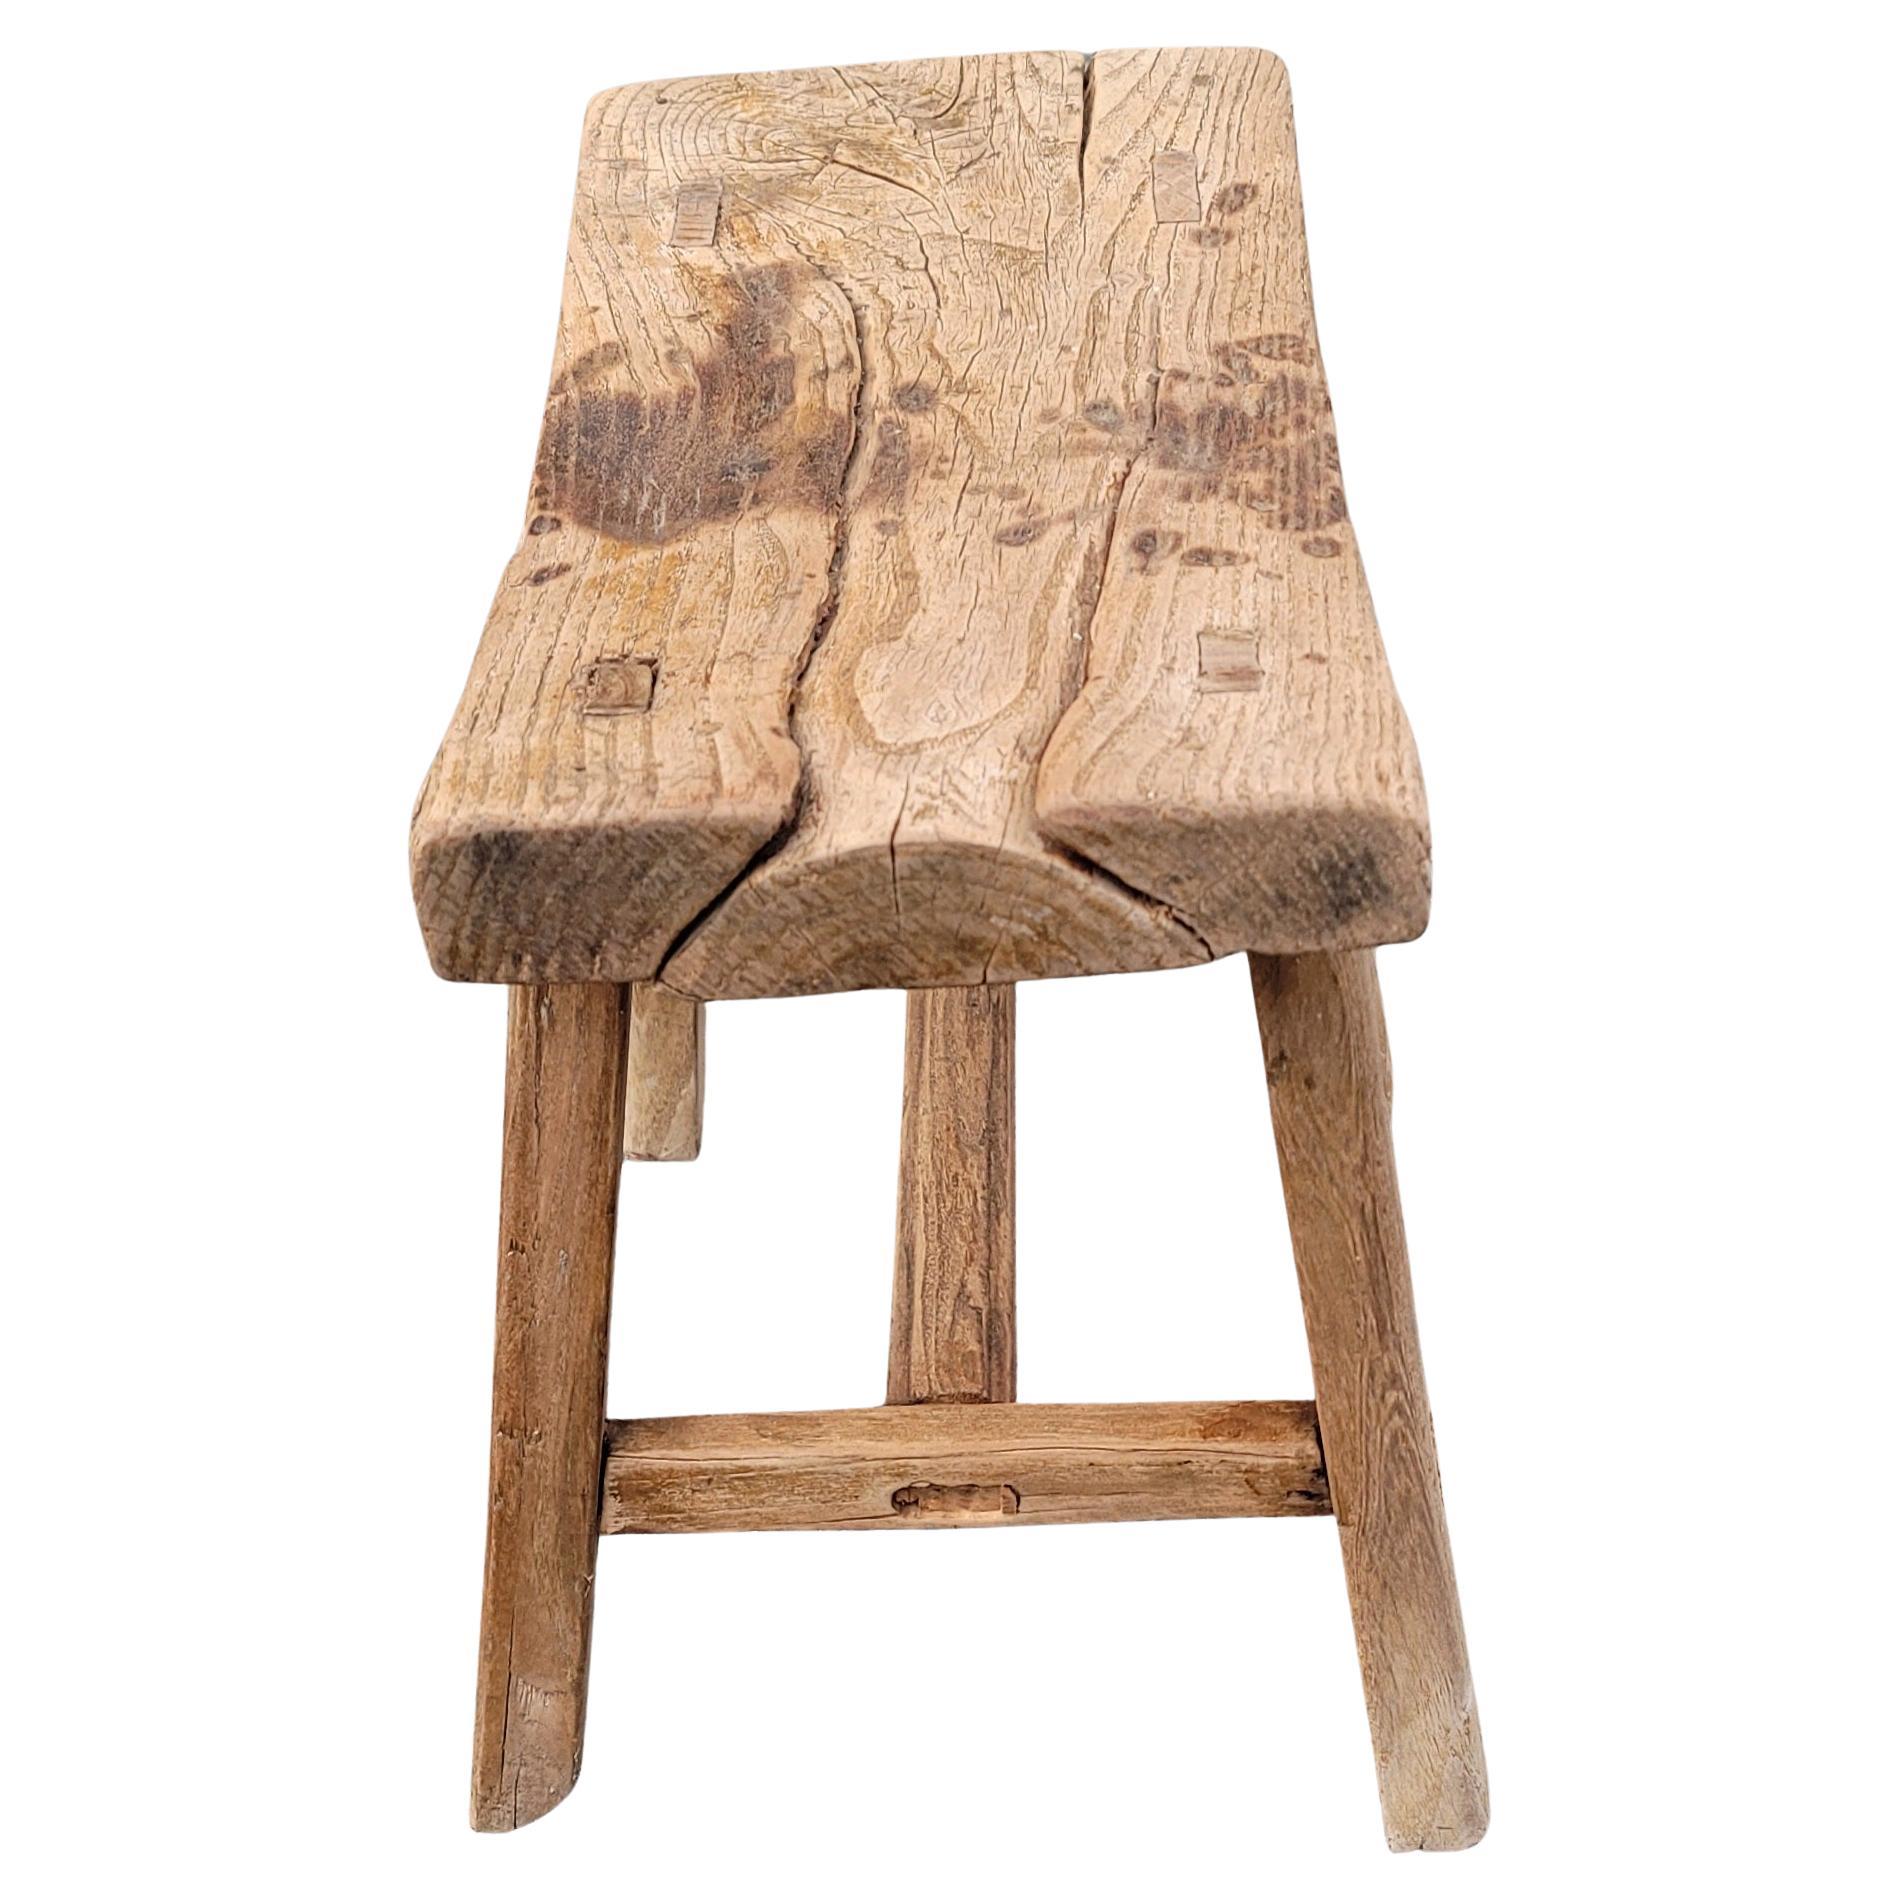 19th Century Chinese Elm Rustic Primitive Brutalist Stool In Good Condition For Sale In Germantown, MD